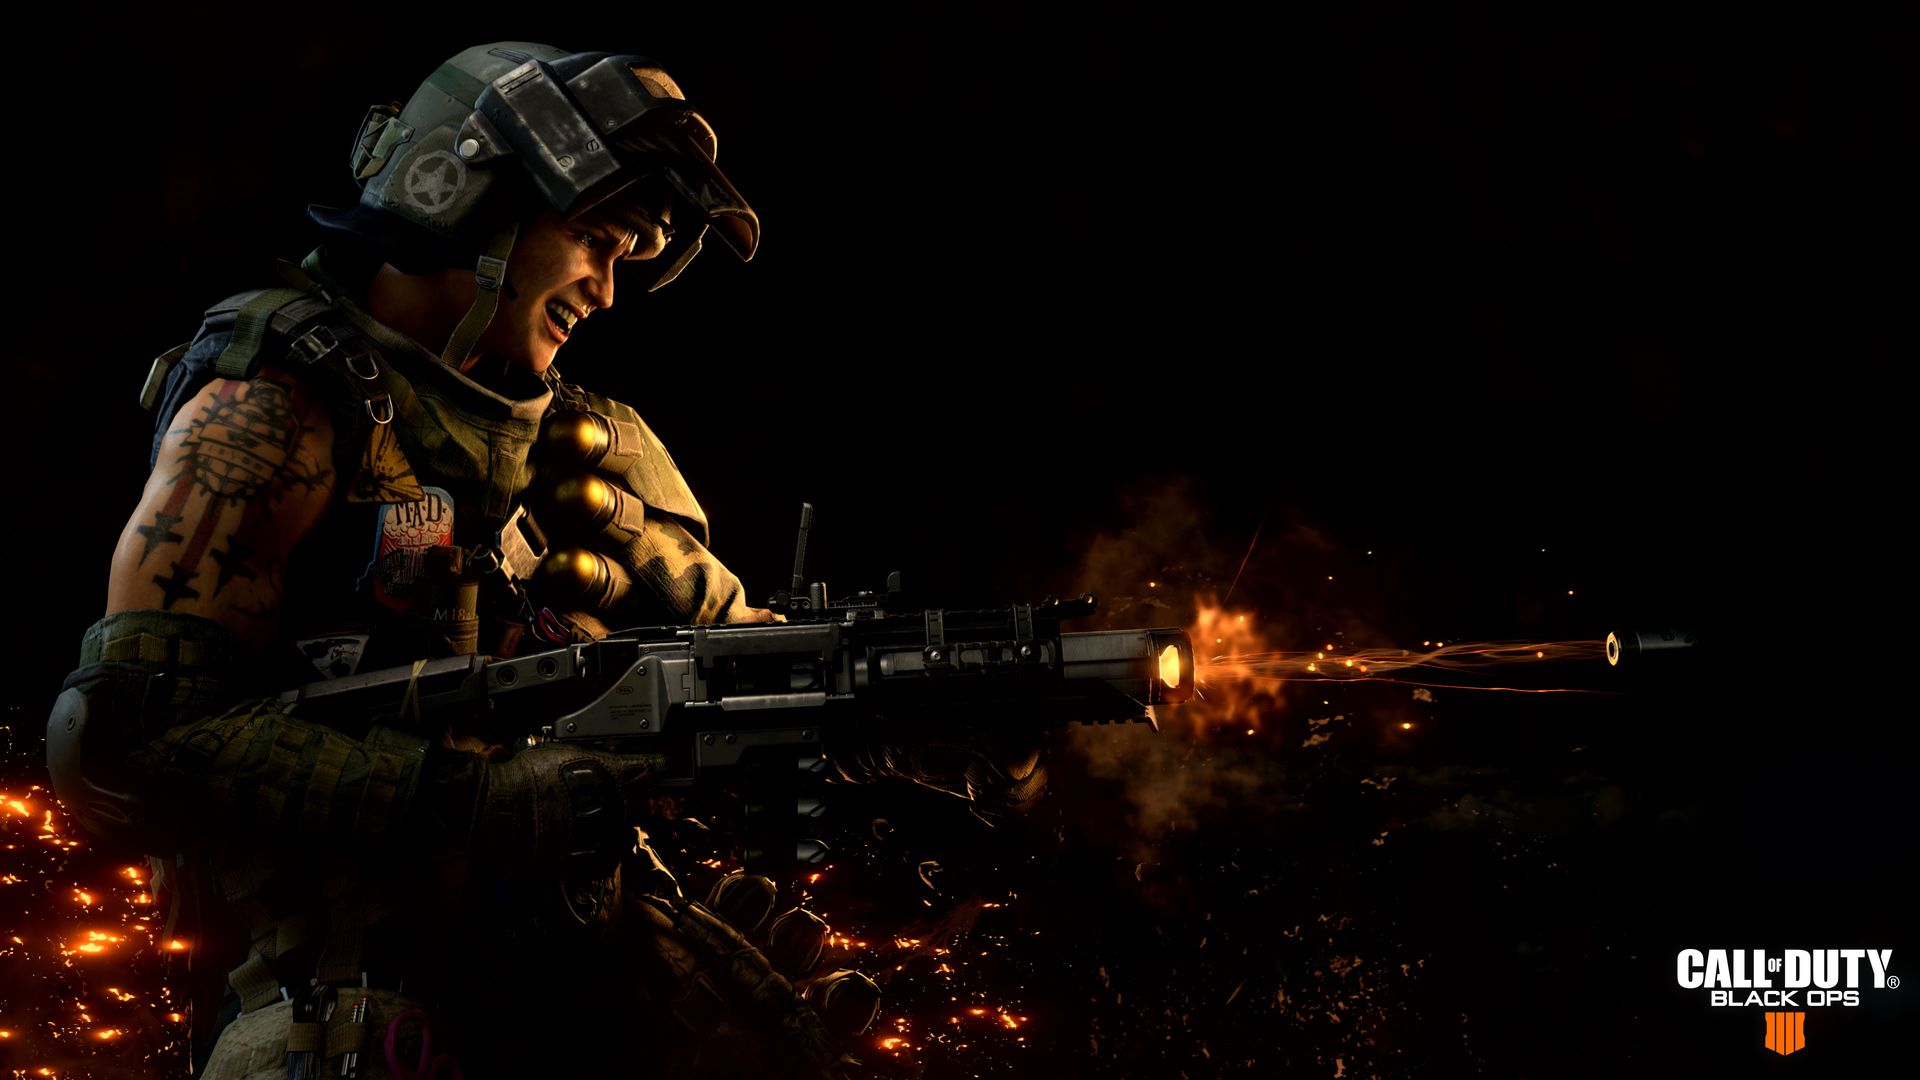 Call of Duty Black Ops 4 Computer Background. Computer Background